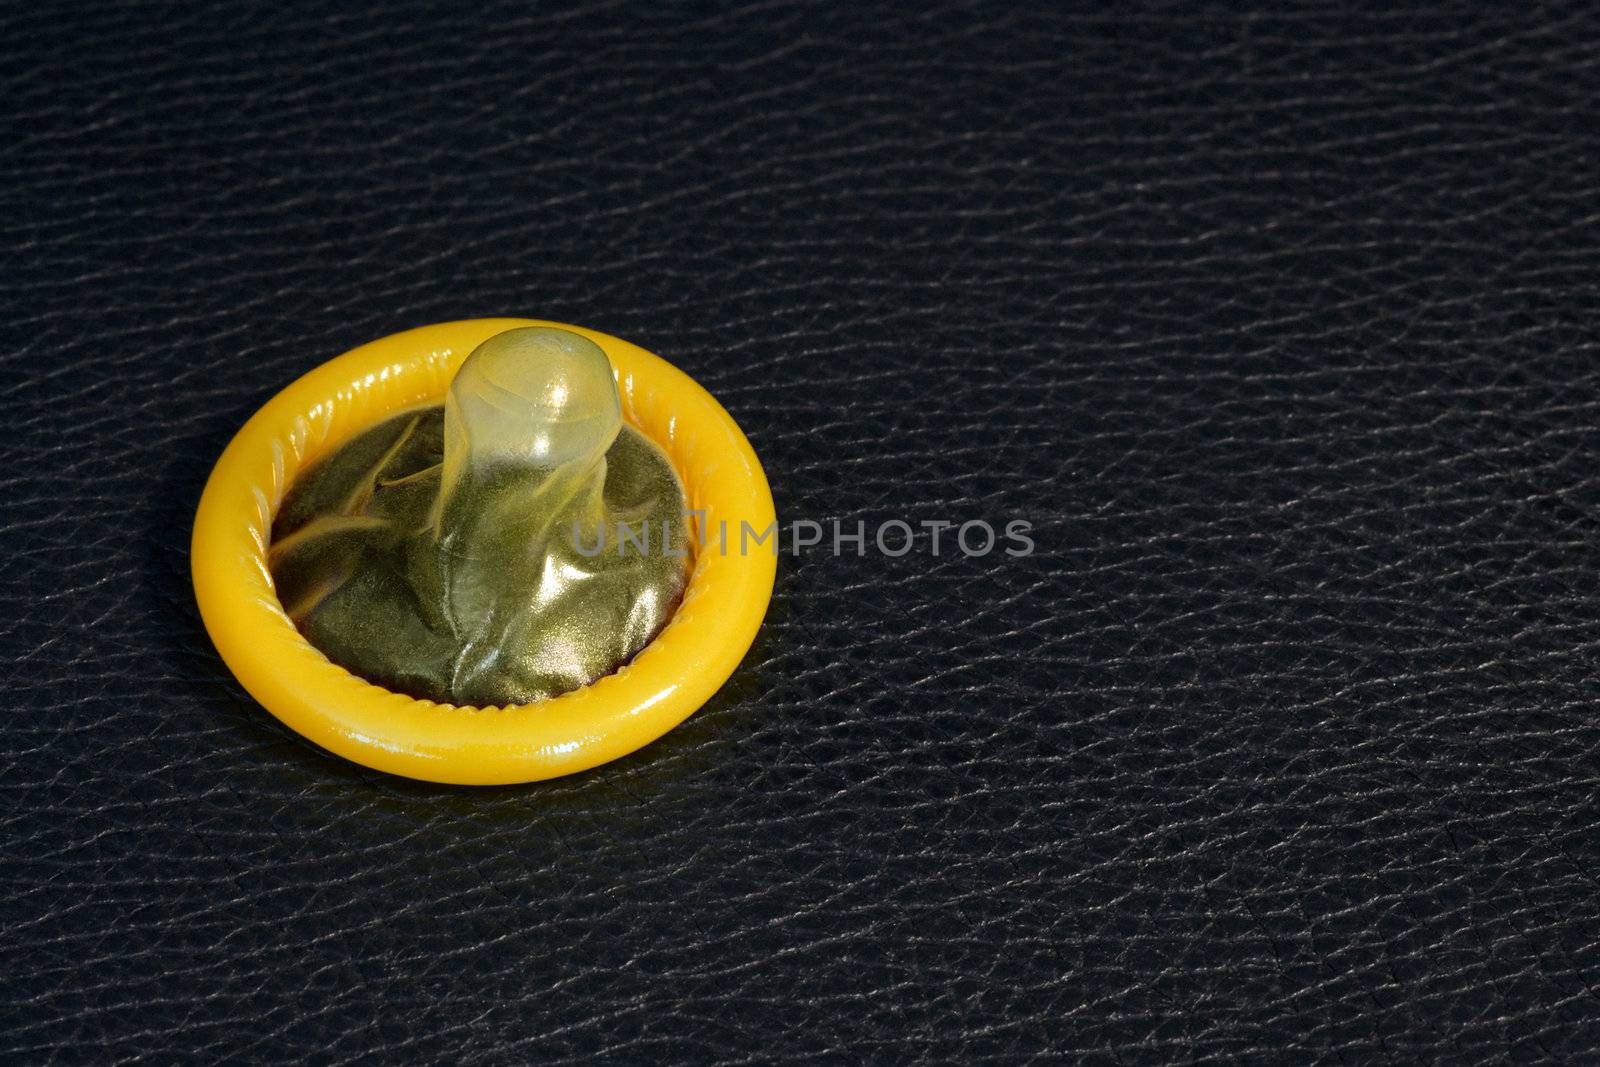 Yellow condom on leather by sumners